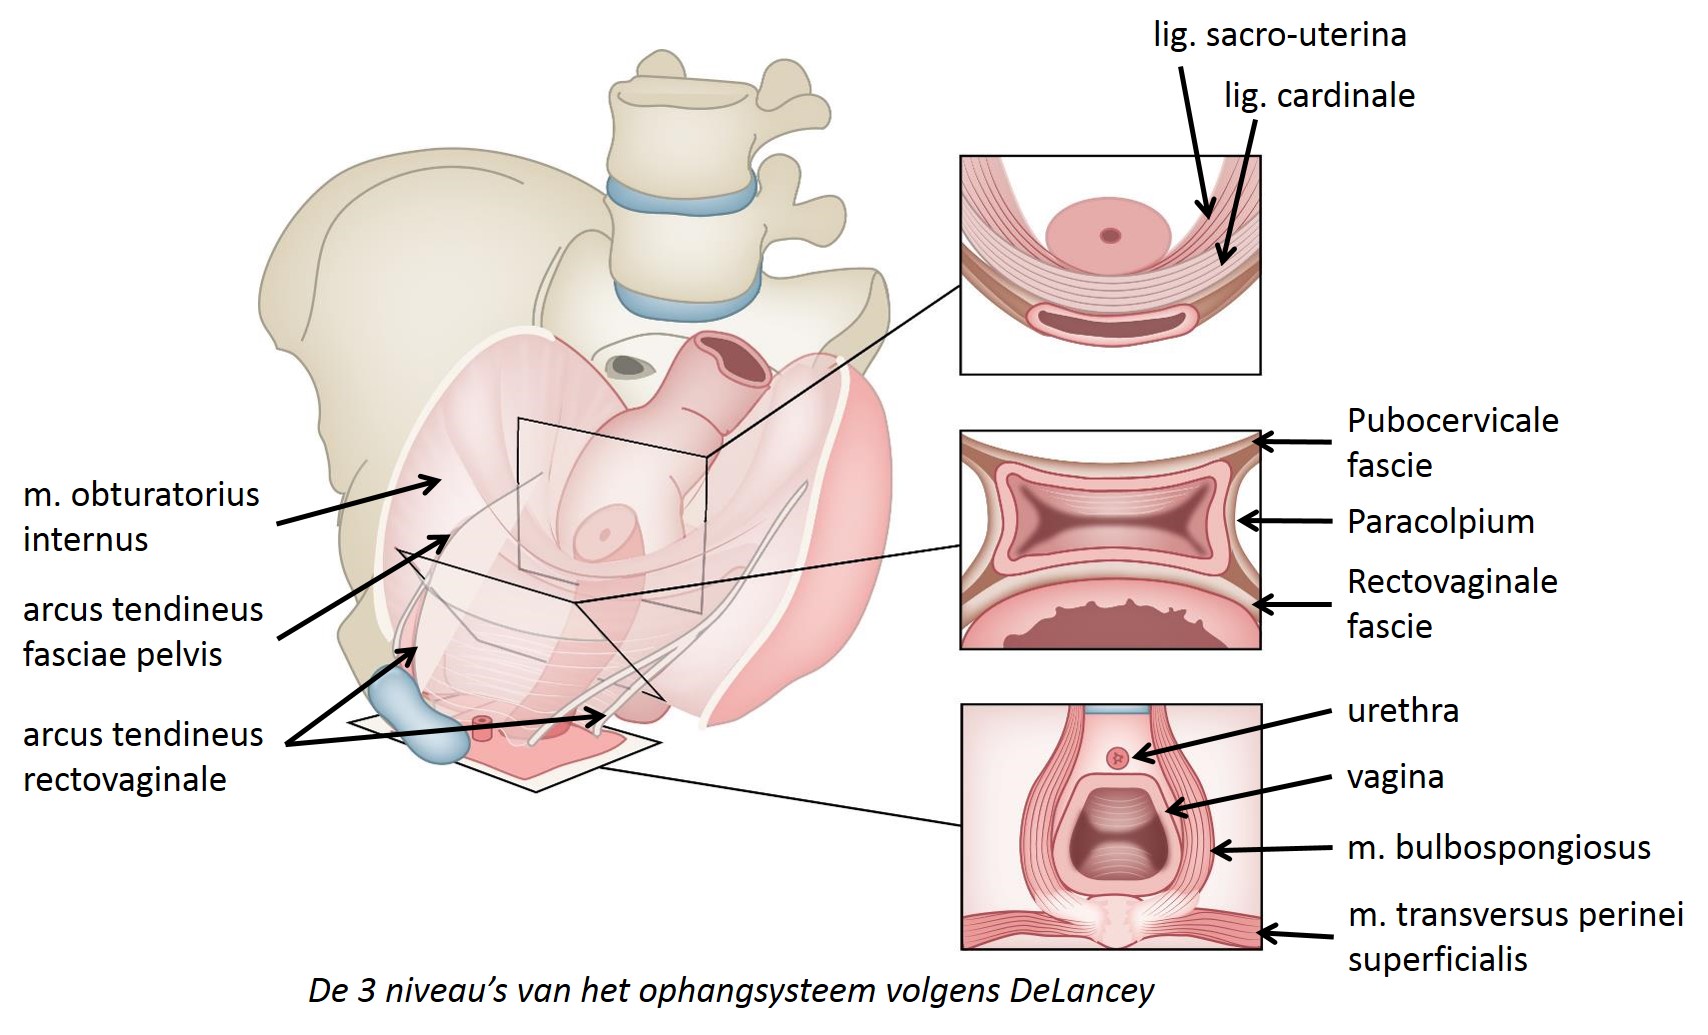 Delancey's three levels of pelvic support – Dutch lables